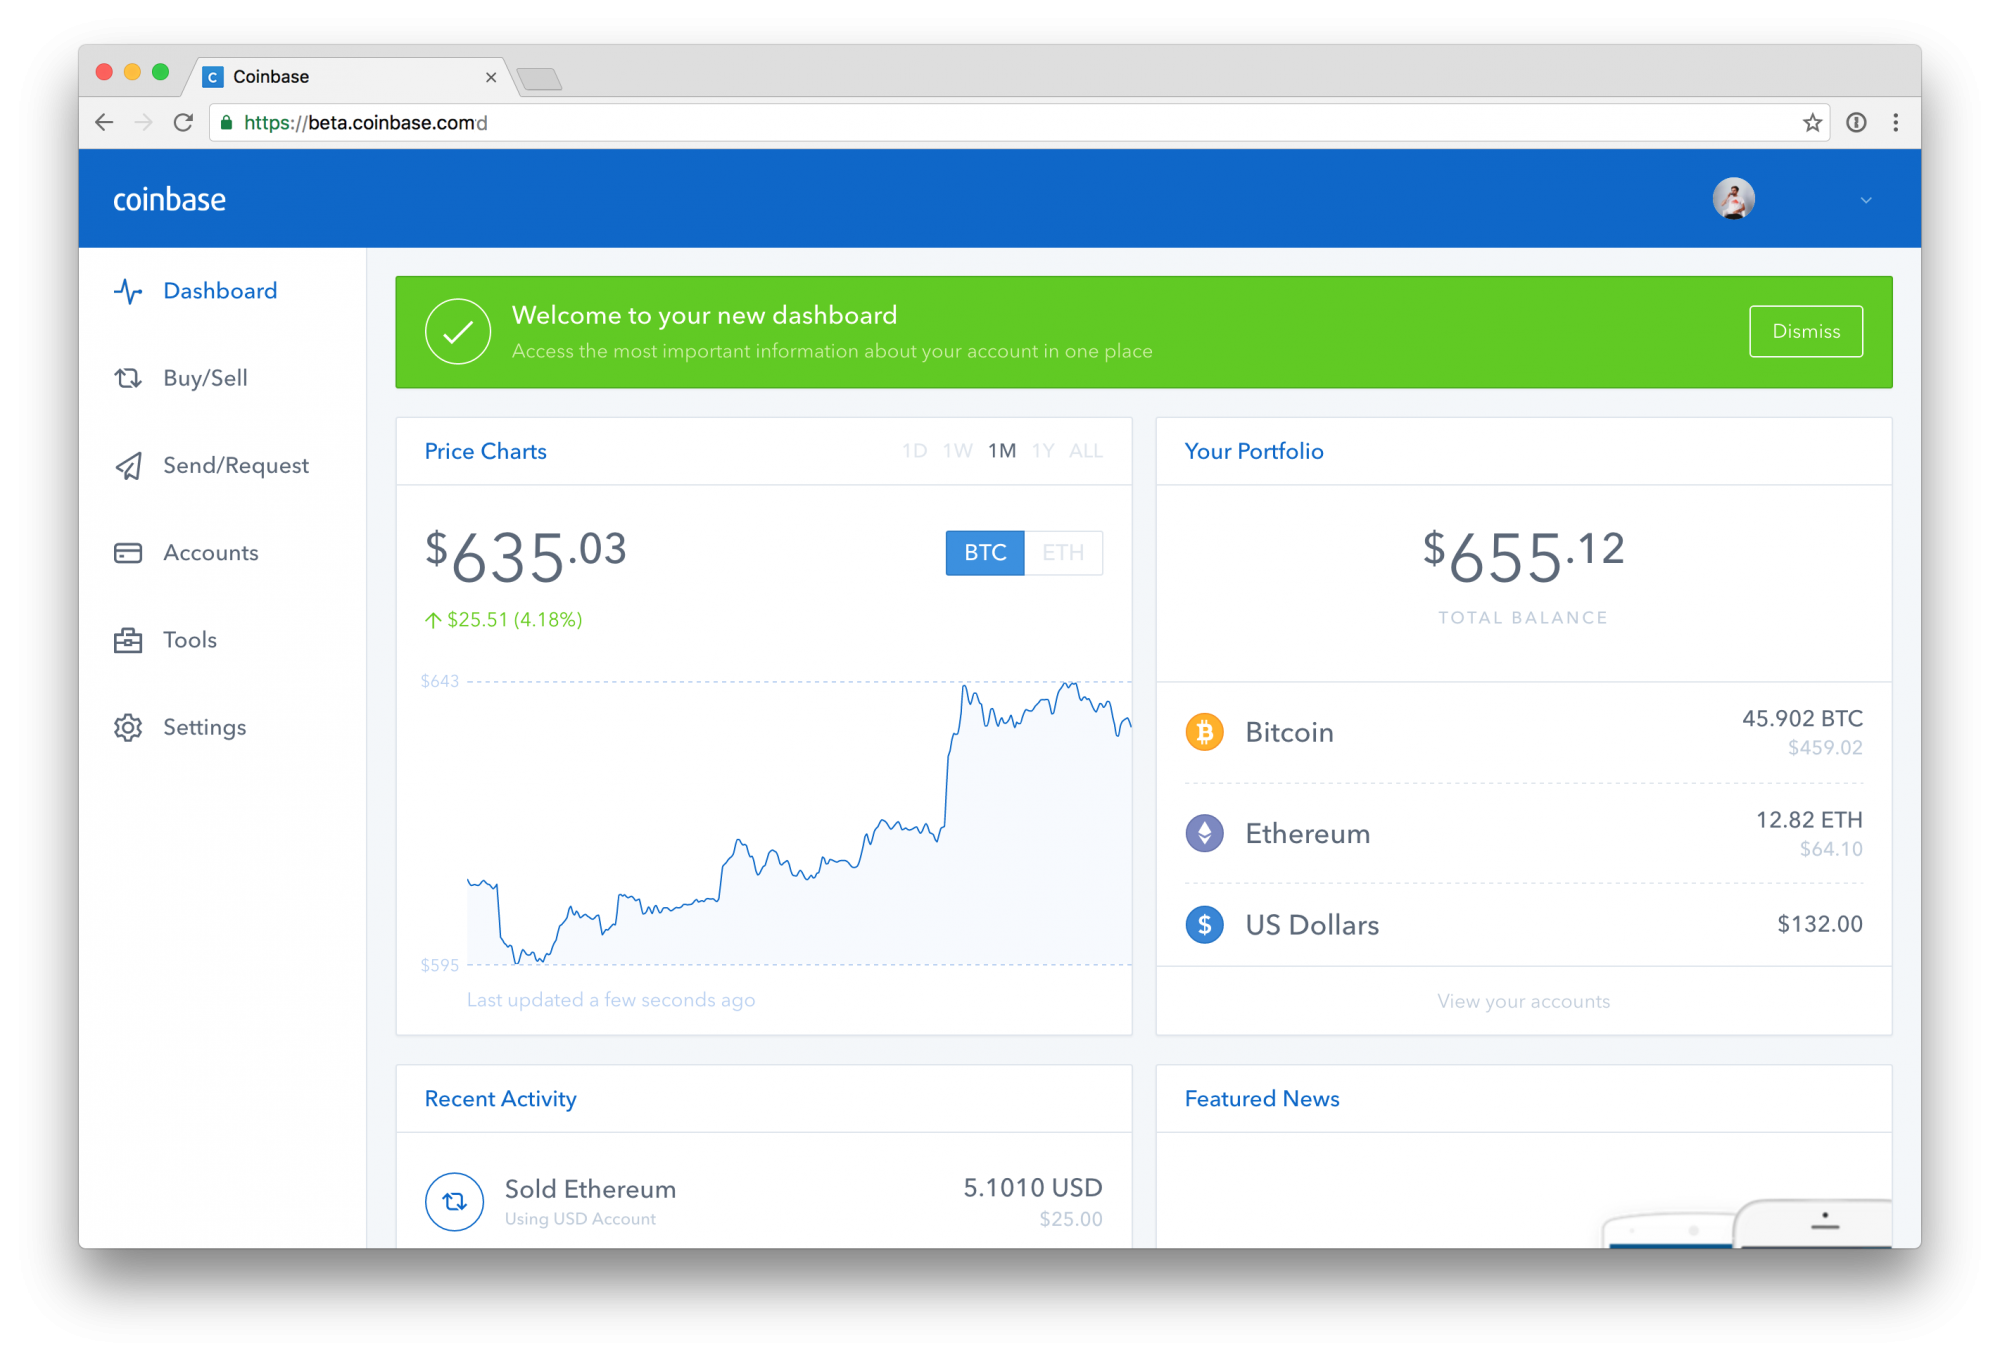 Coinbase Discount Coupons For Buy Bitcoin | Greatest ...